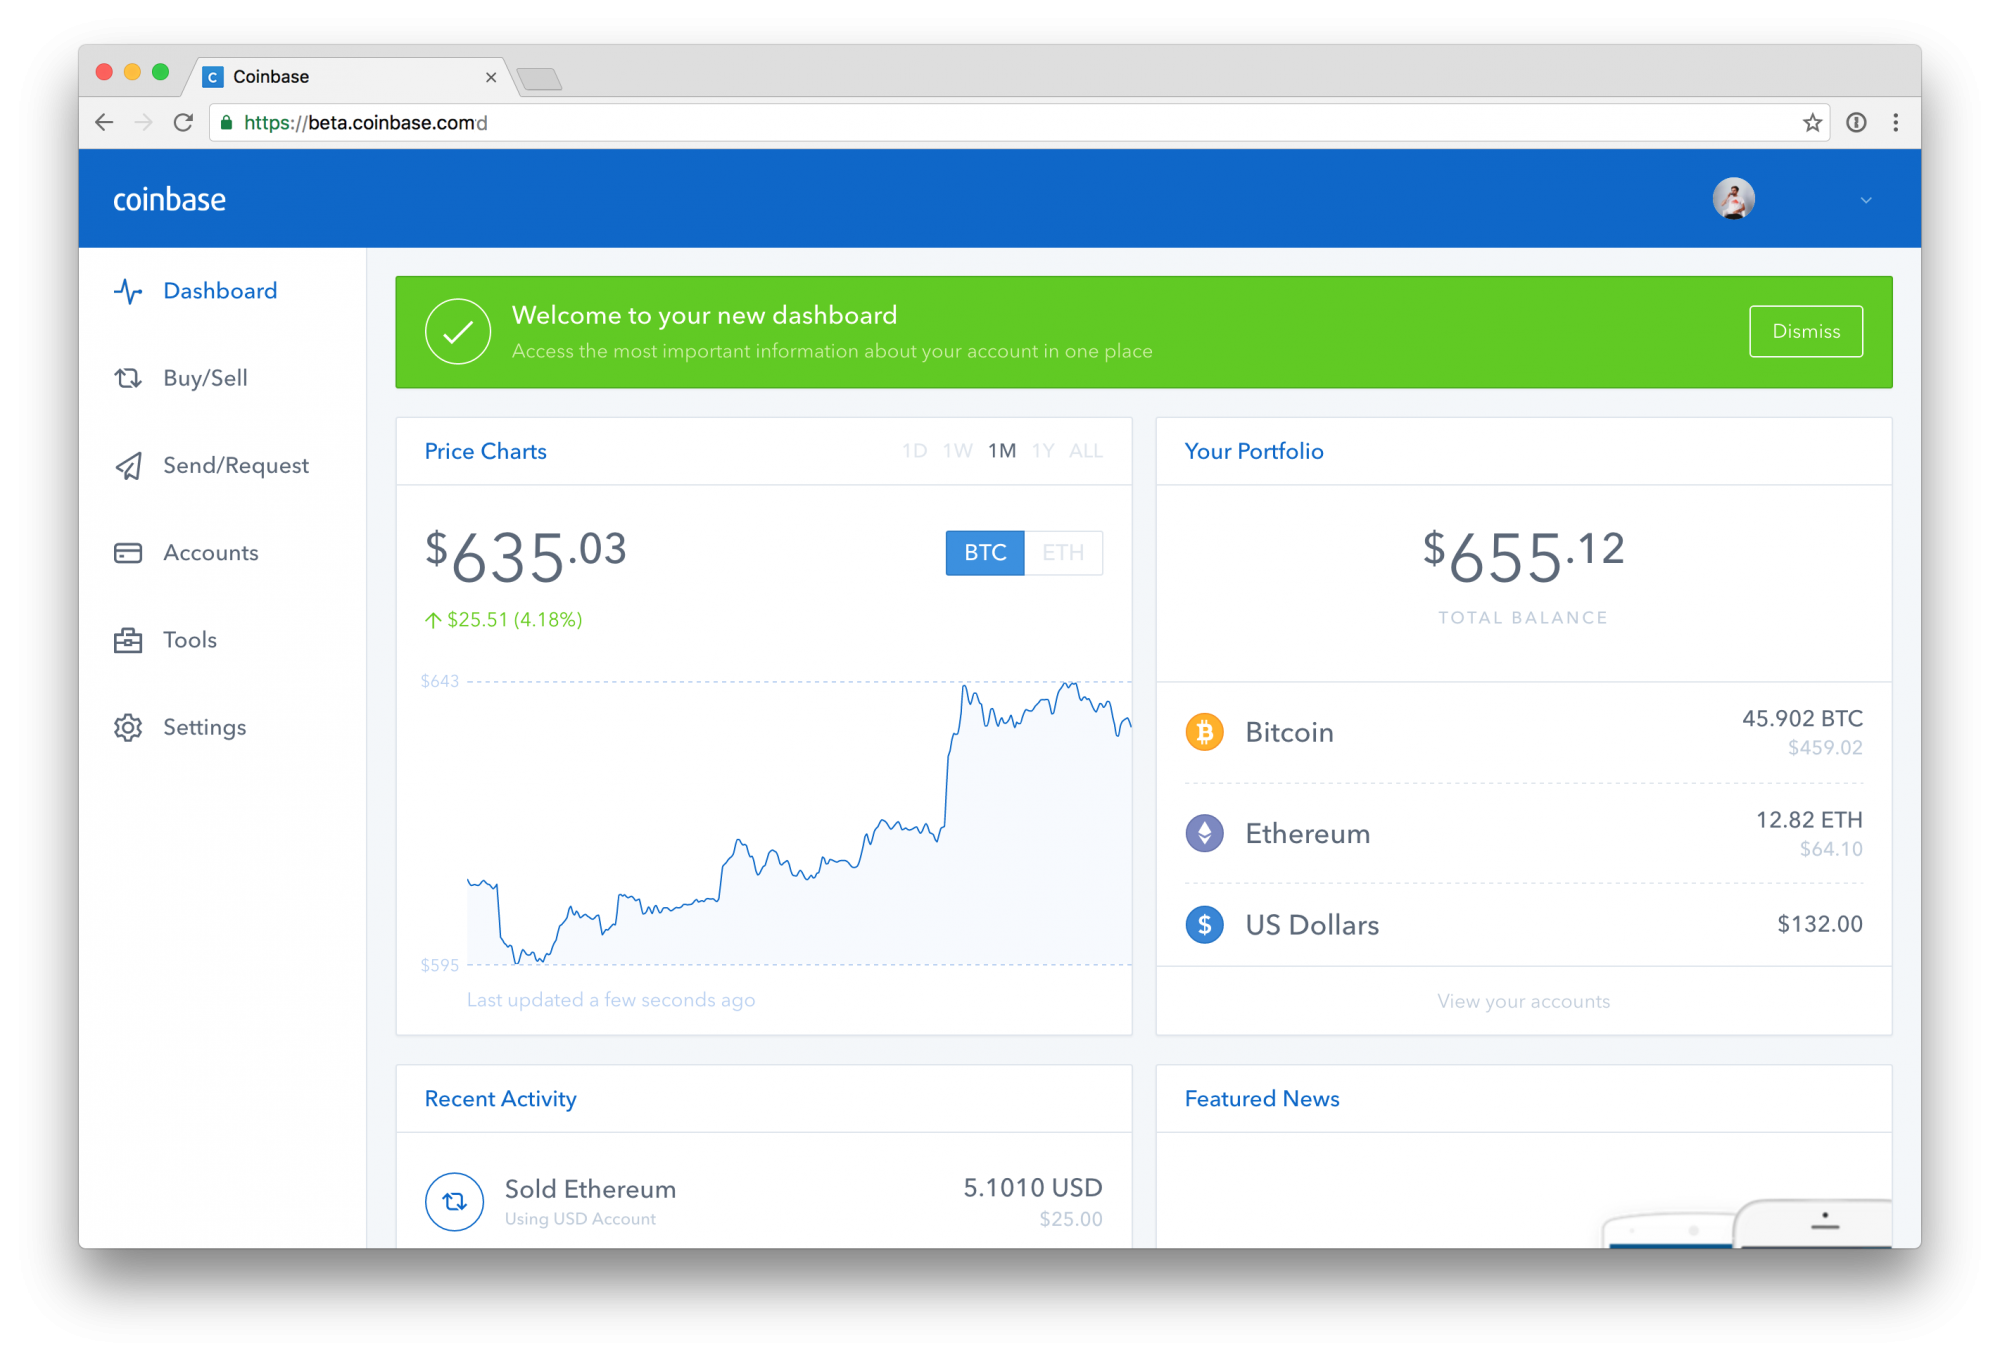 Coinbase Discount Coupons For Buy Bitcoin | Greatest ...